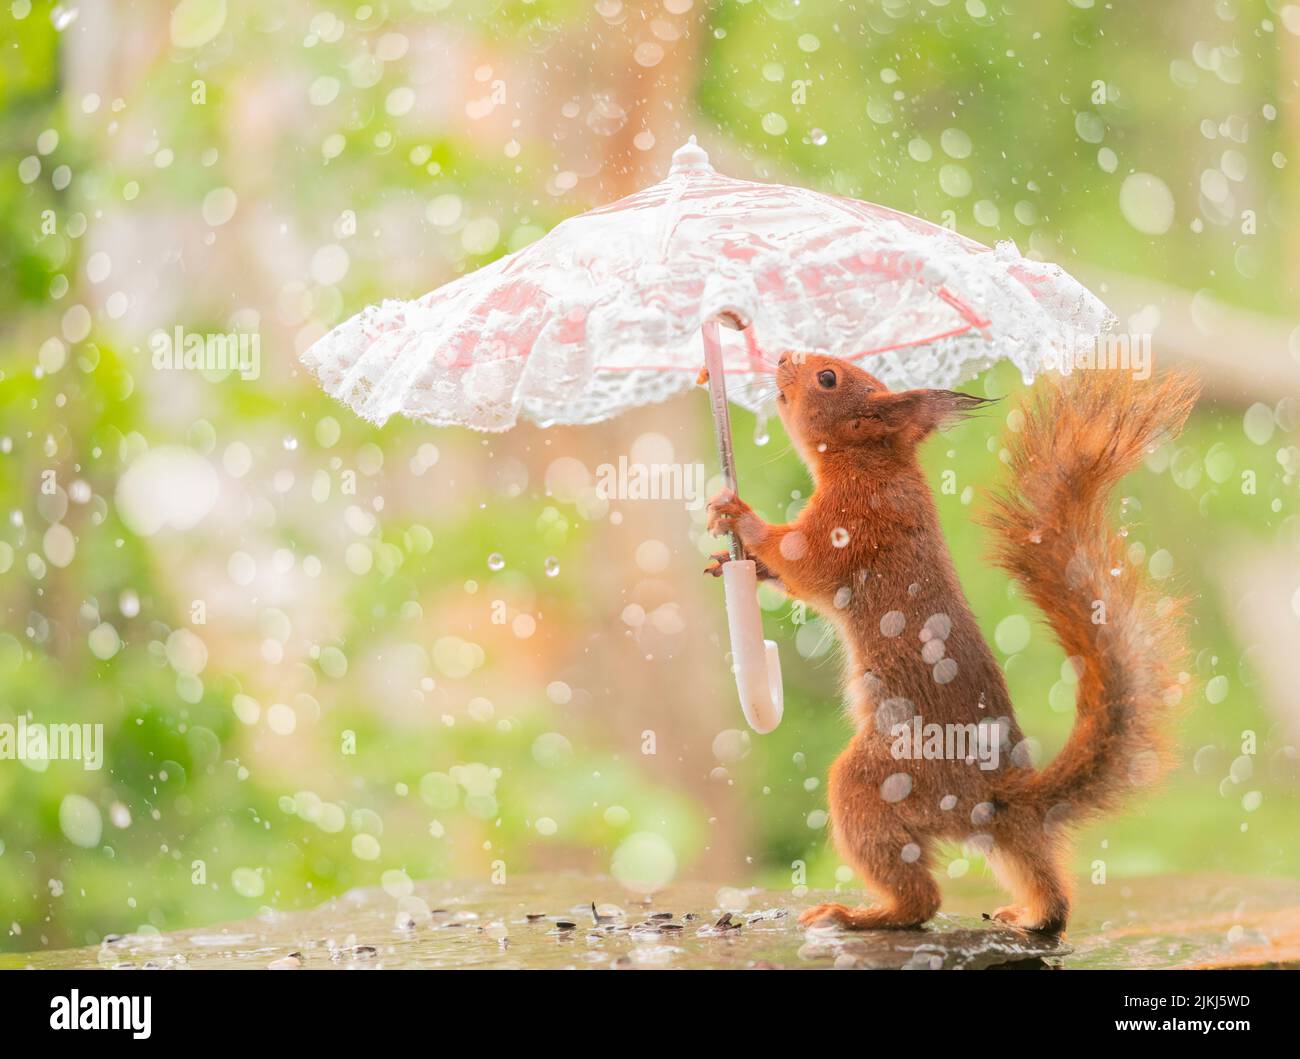 Red Squirrel stand in rain with umbrella Stock Photo